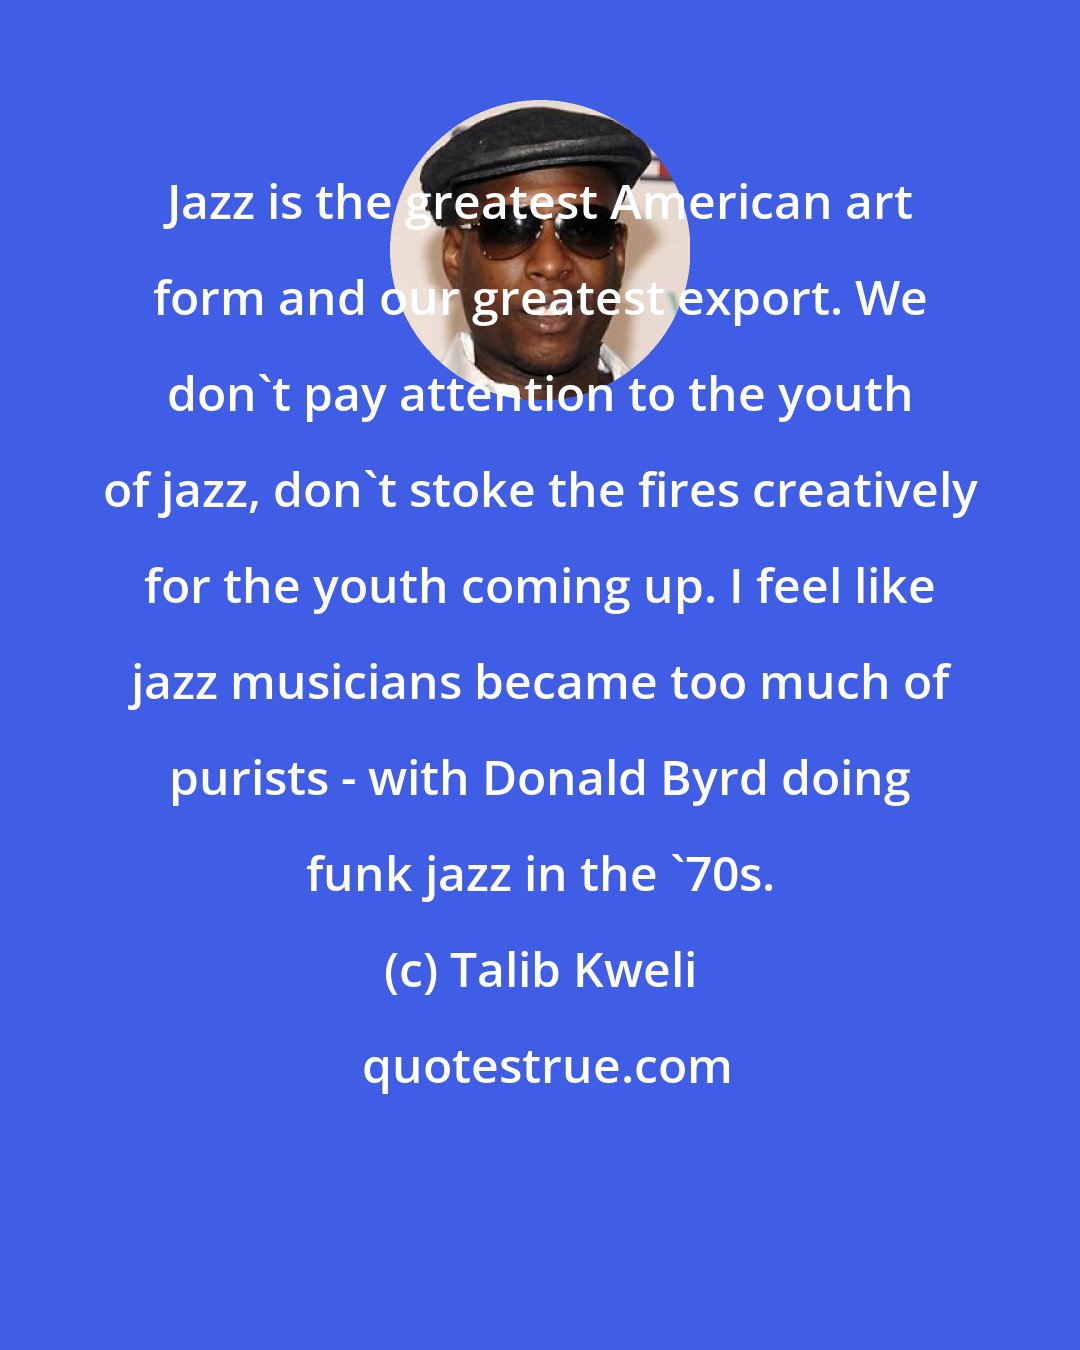 Talib Kweli: Jazz is the greatest American art form and our greatest export. We don't pay attention to the youth of jazz, don't stoke the fires creatively for the youth coming up. I feel like jazz musicians became too much of purists - with Donald Byrd doing funk jazz in the '70s.